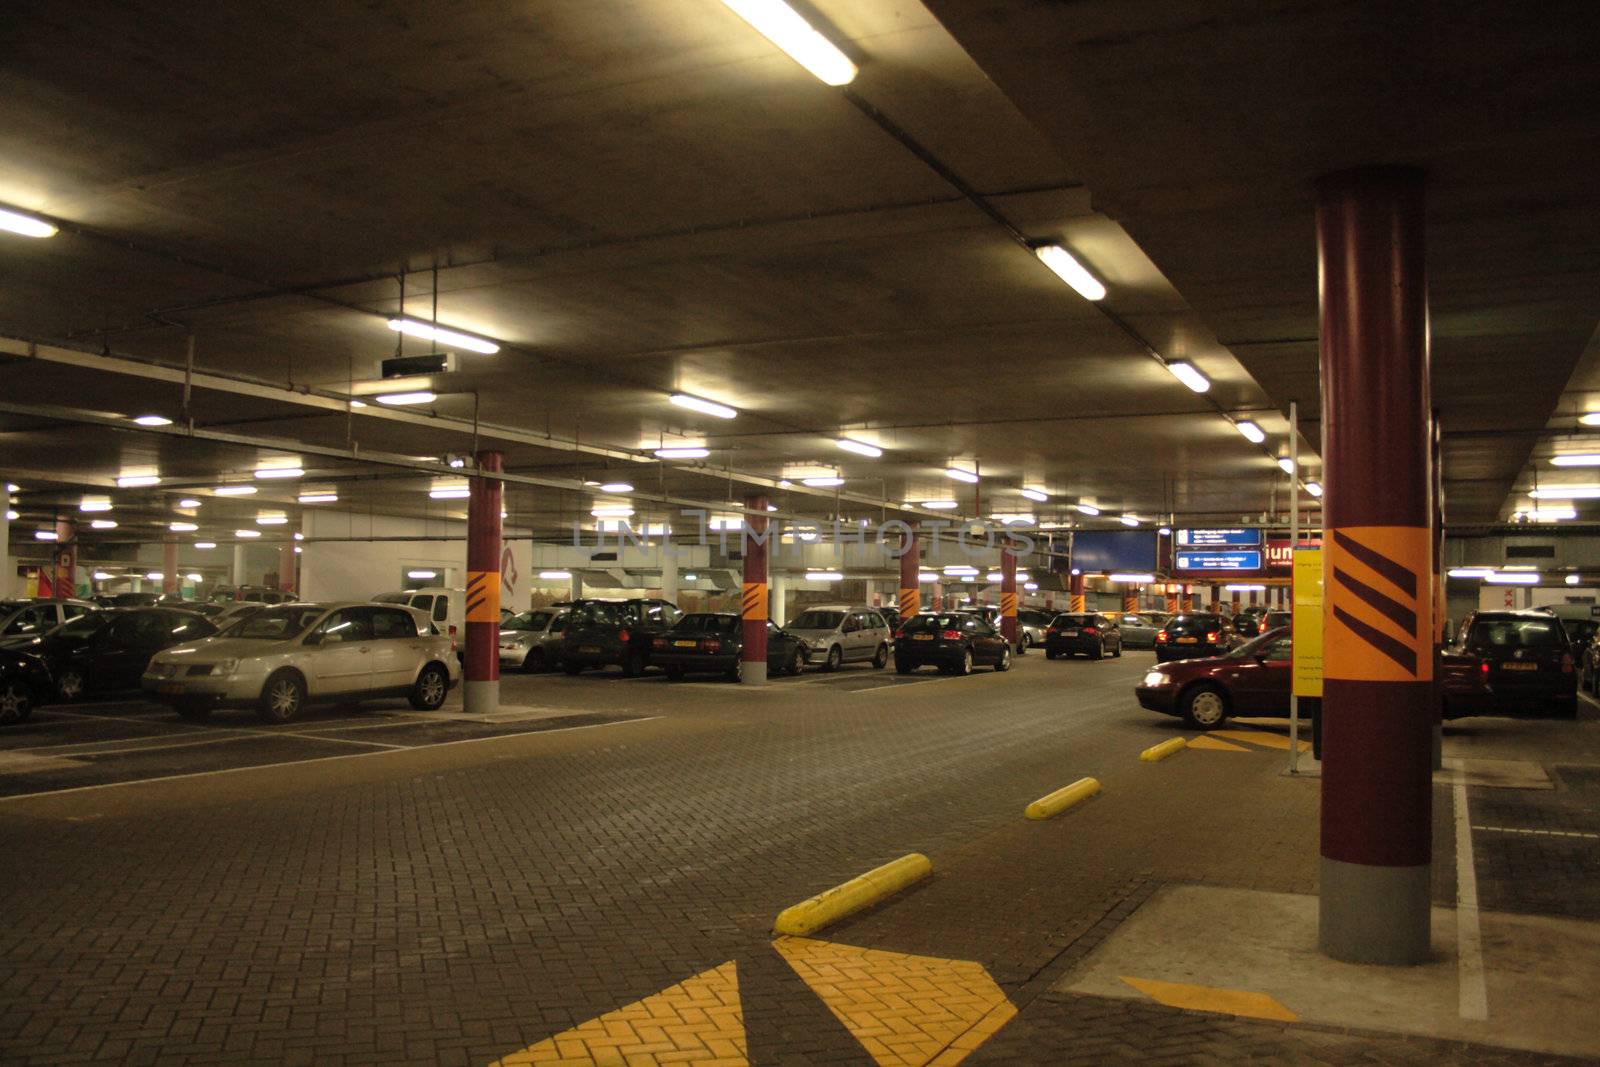 Interior of undergrond parking garage at night with cars